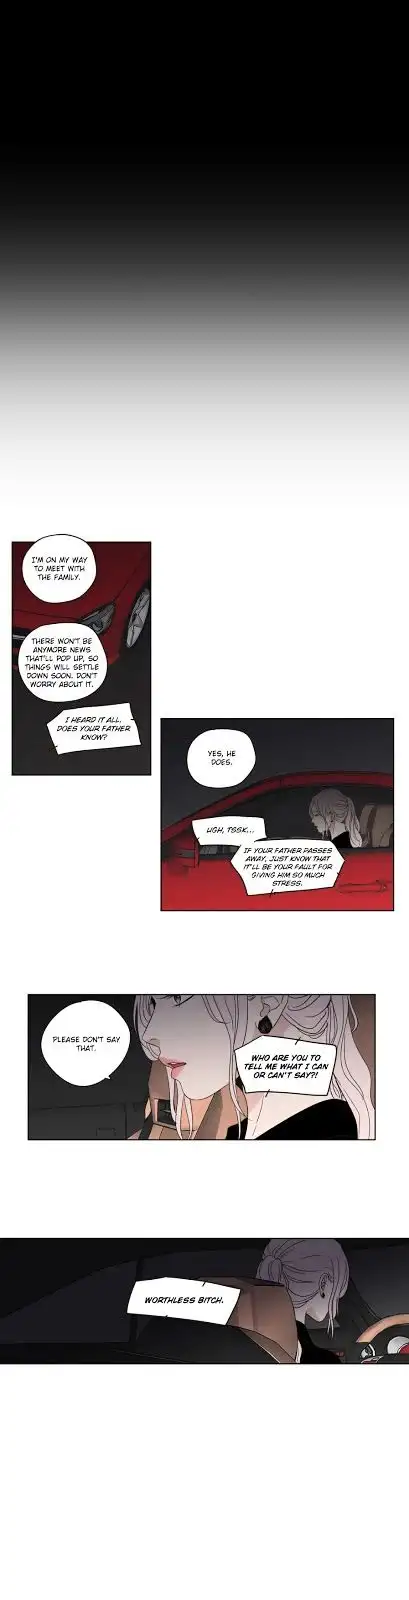 What Does the Fox Say? - Chapter 49 Page 5